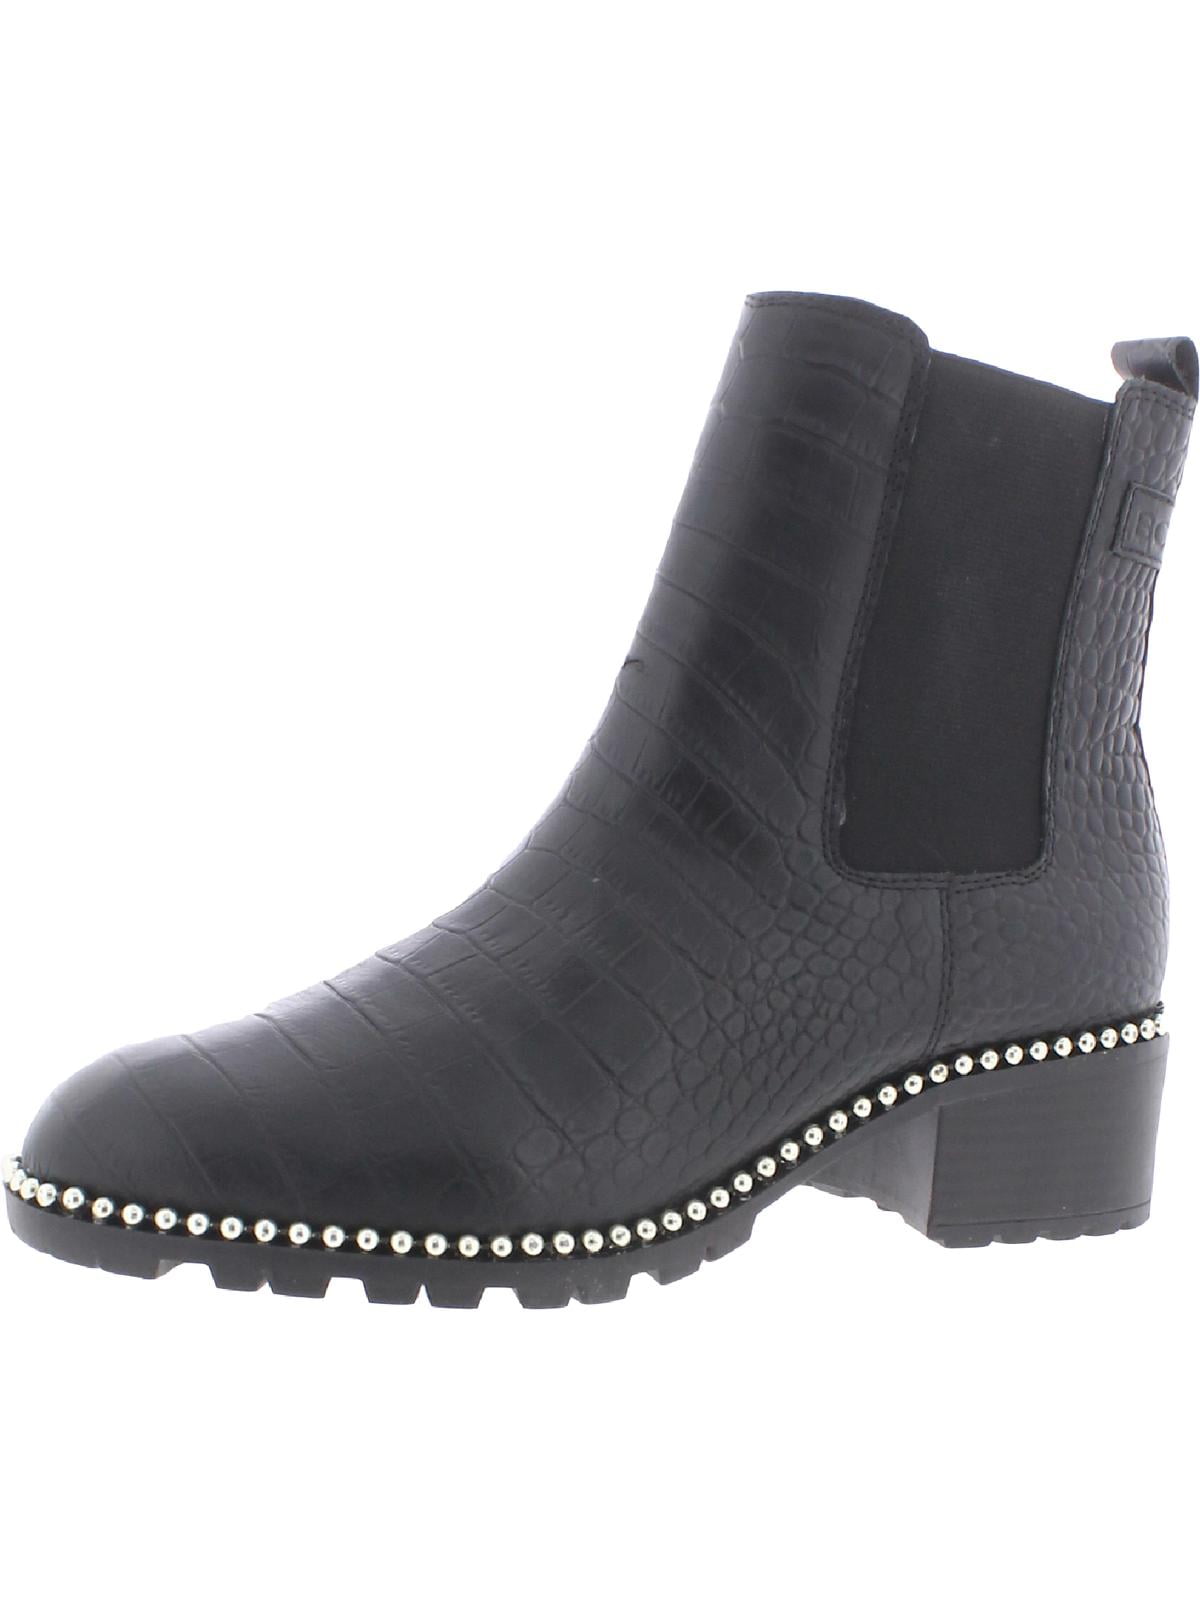 BCBGeneration Women's Natti Faux Leather Studded Chelsea Boots